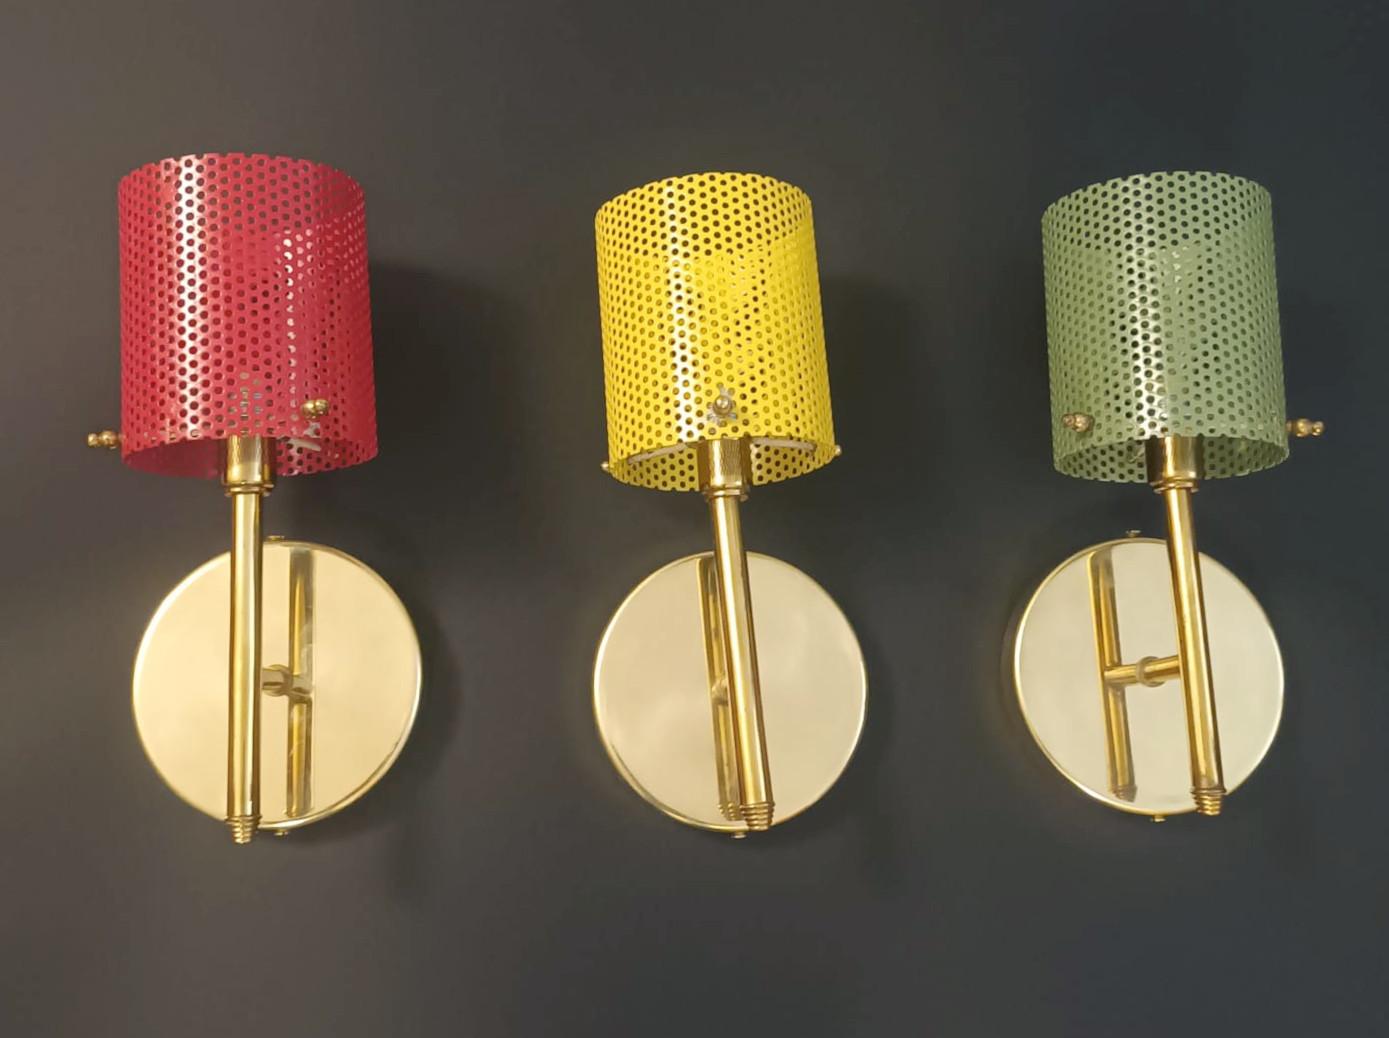 Midcentury Italian wall lights with red, green, and yellow perforated brass shades / Made in Italy in the style of Stilnovo, circa 1950s.
Measures: height 10 inches, width 4.7 inches, depth 4.7 inches, backplate diameter 4.7 inches
1 light / G9 type